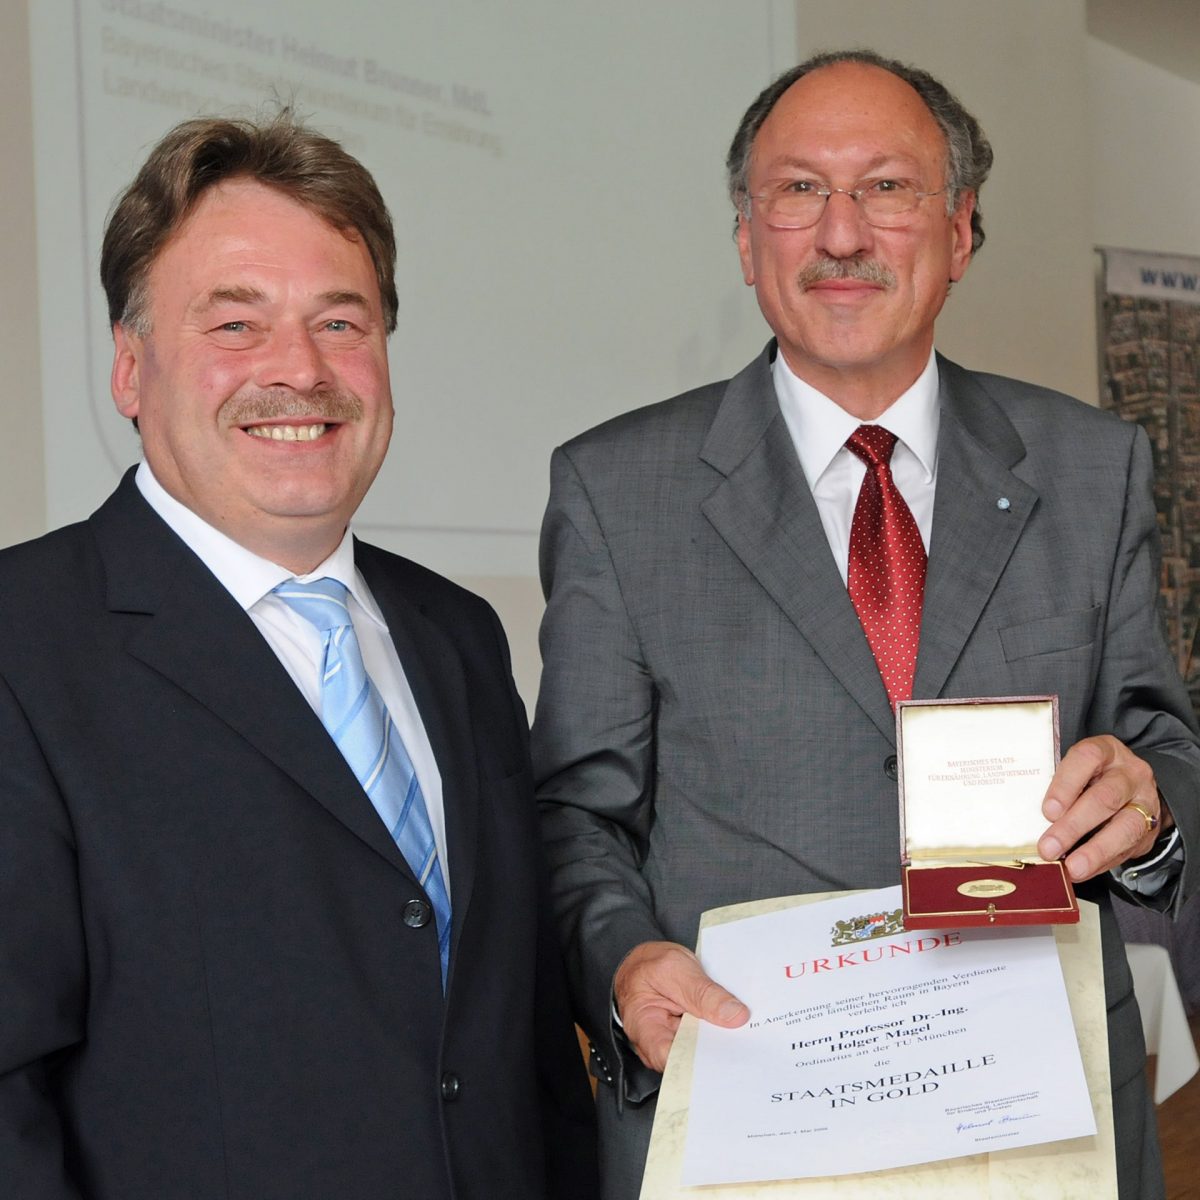 TUM Alumnus Holger Magel is honoured with the State Medal.